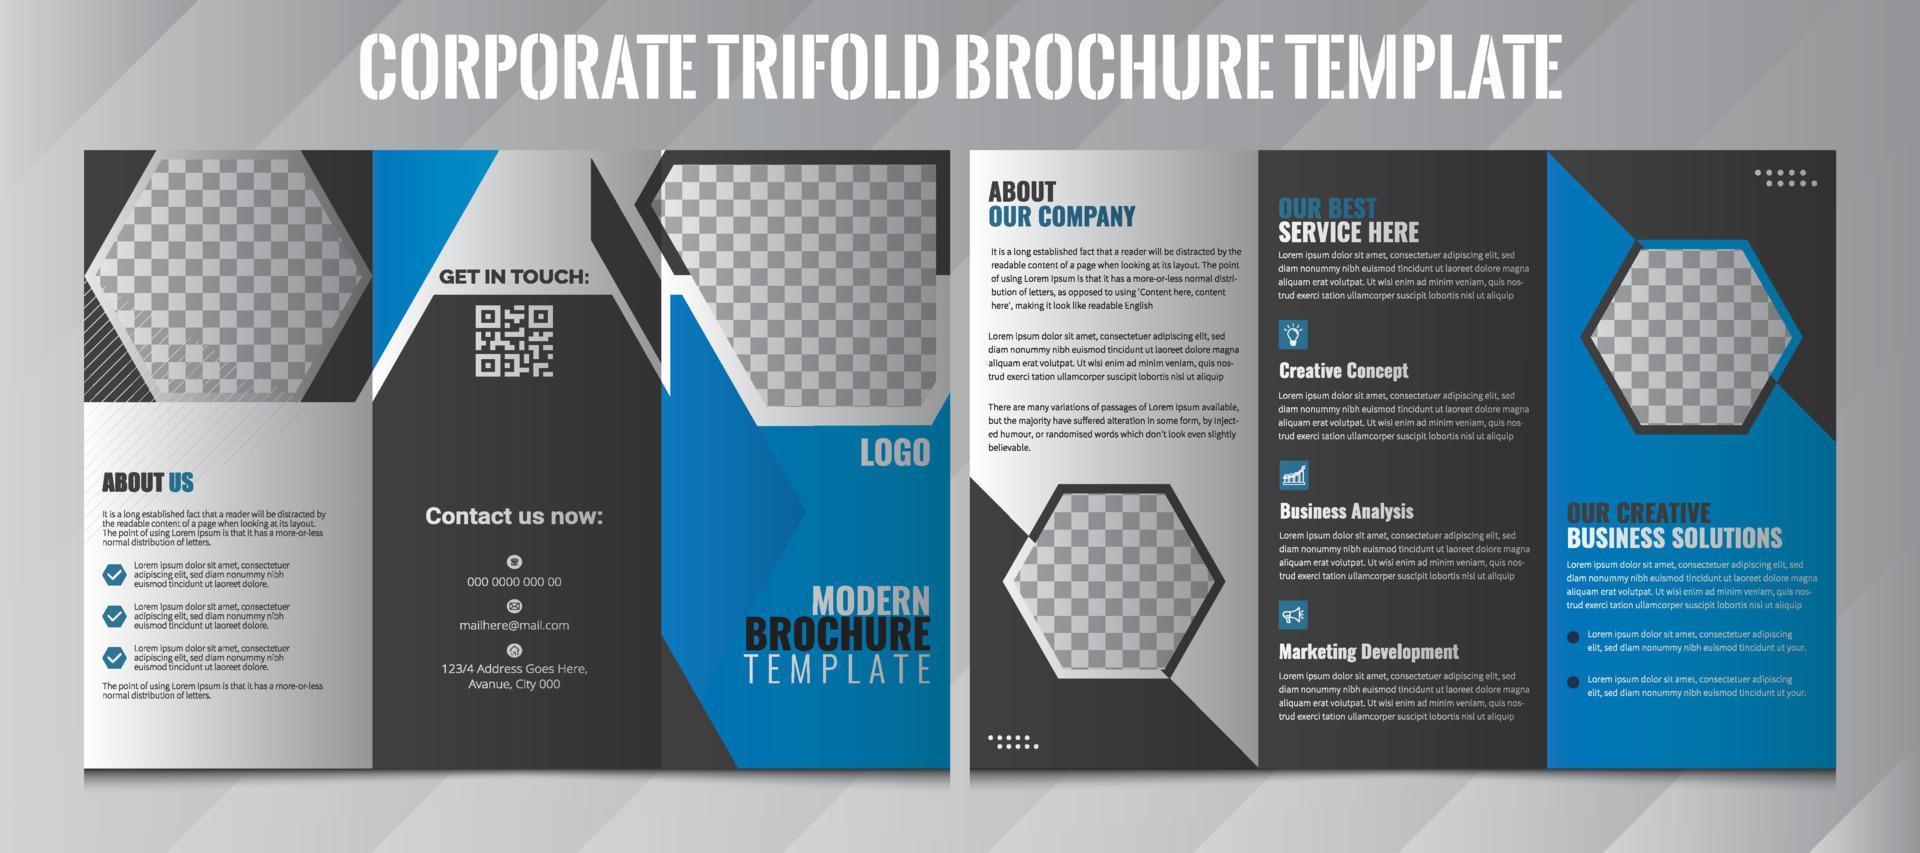 Tri-fold brochure design. Corporate business template for tri-fold flyer with rhombus square shapes.Corporate Design Leaflet, Layout with modern elements, triangle photo, and abstract background. vector